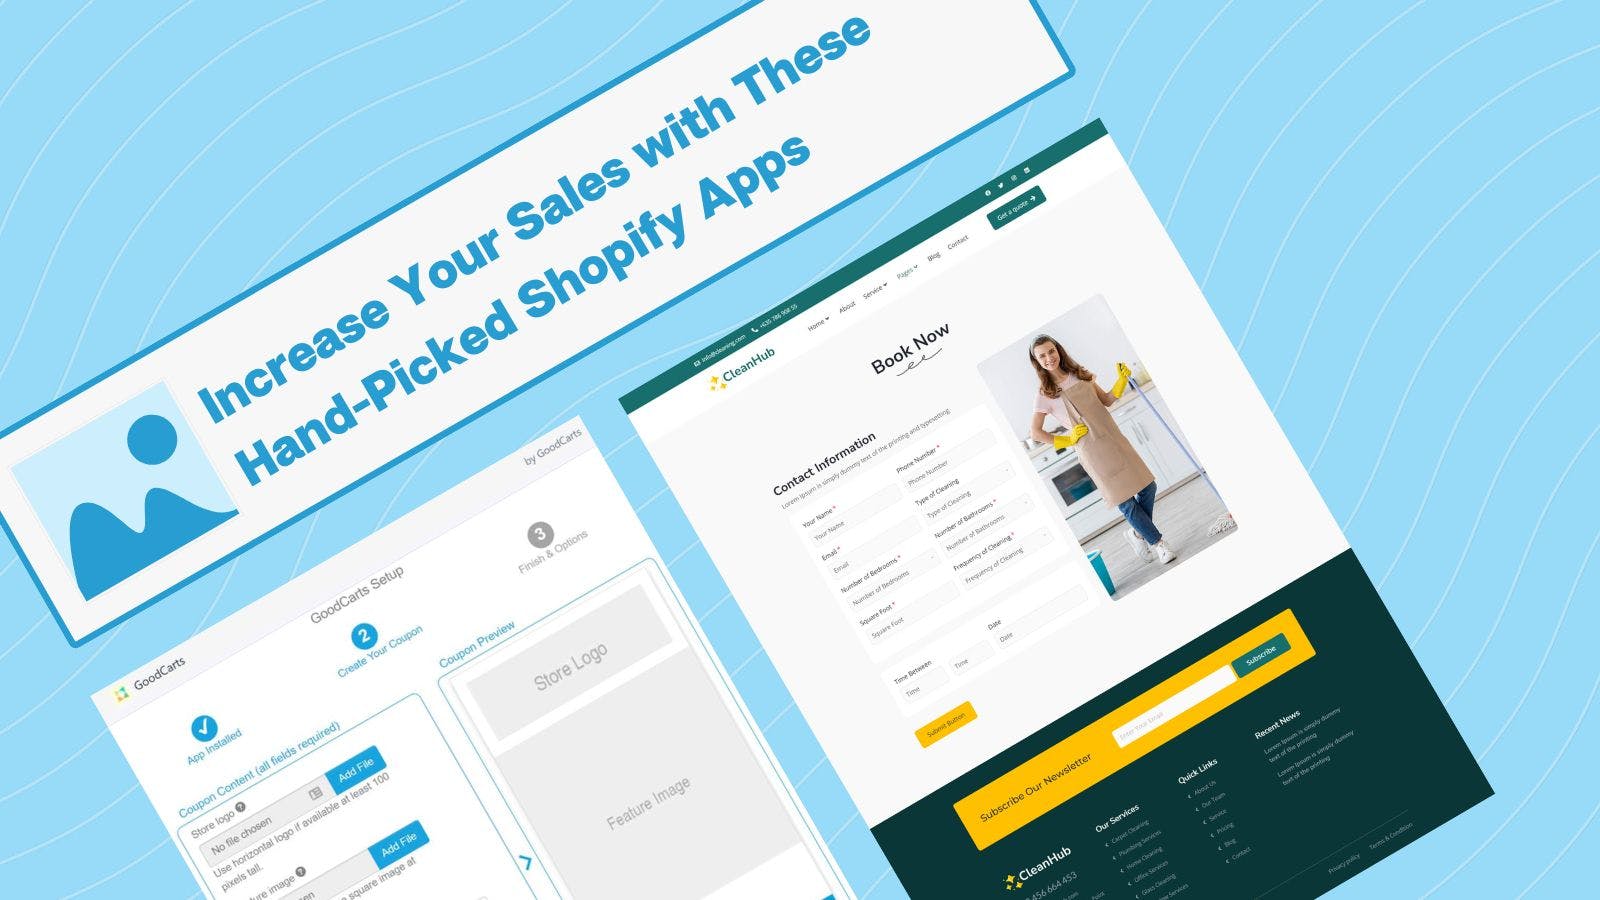 Increase Your Sales With These Hand-Picked Shopify Apps